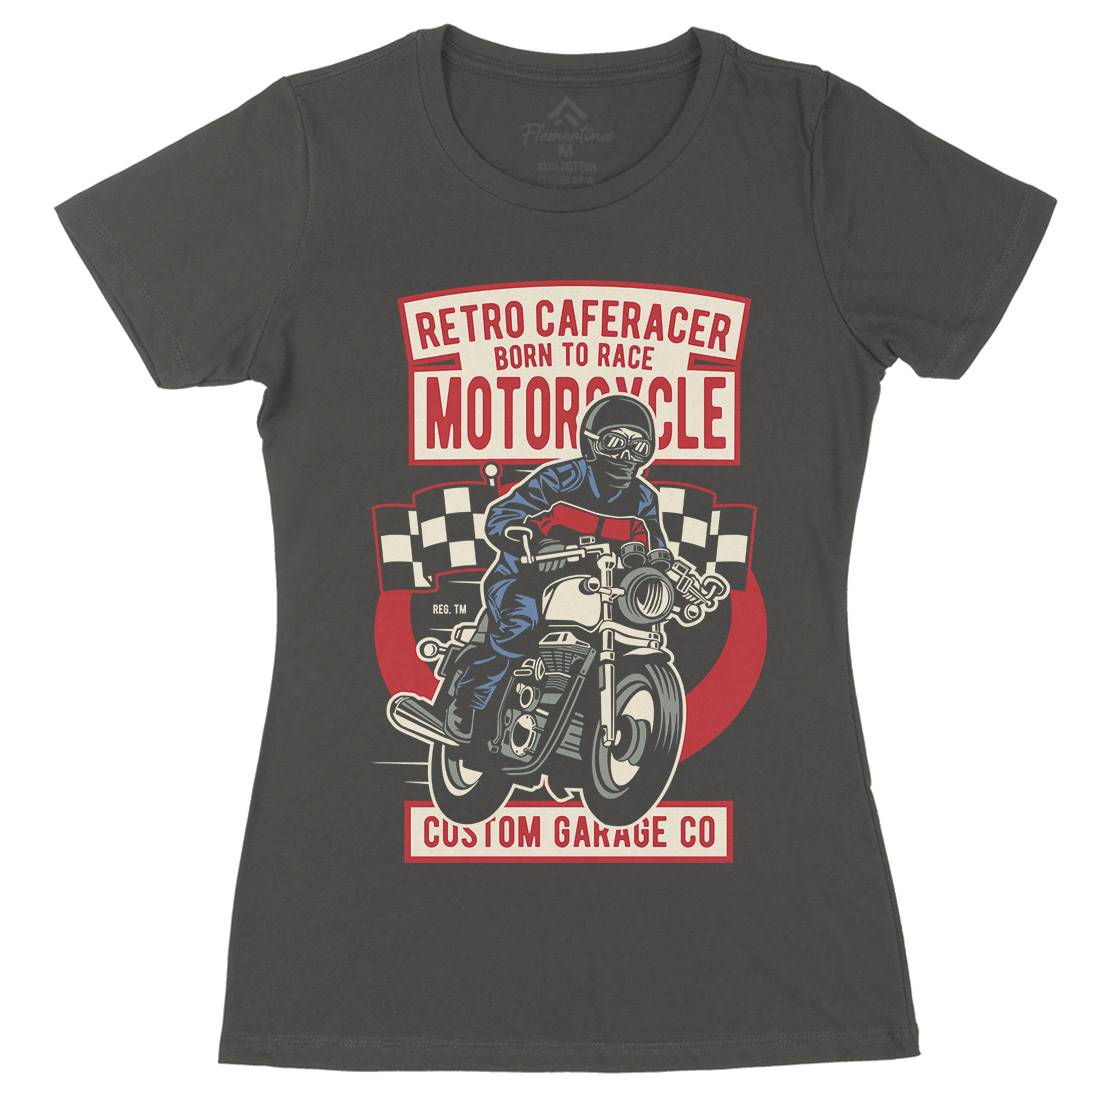 Retro Caferacer Womens Organic Crew Neck T-Shirt Motorcycles D563